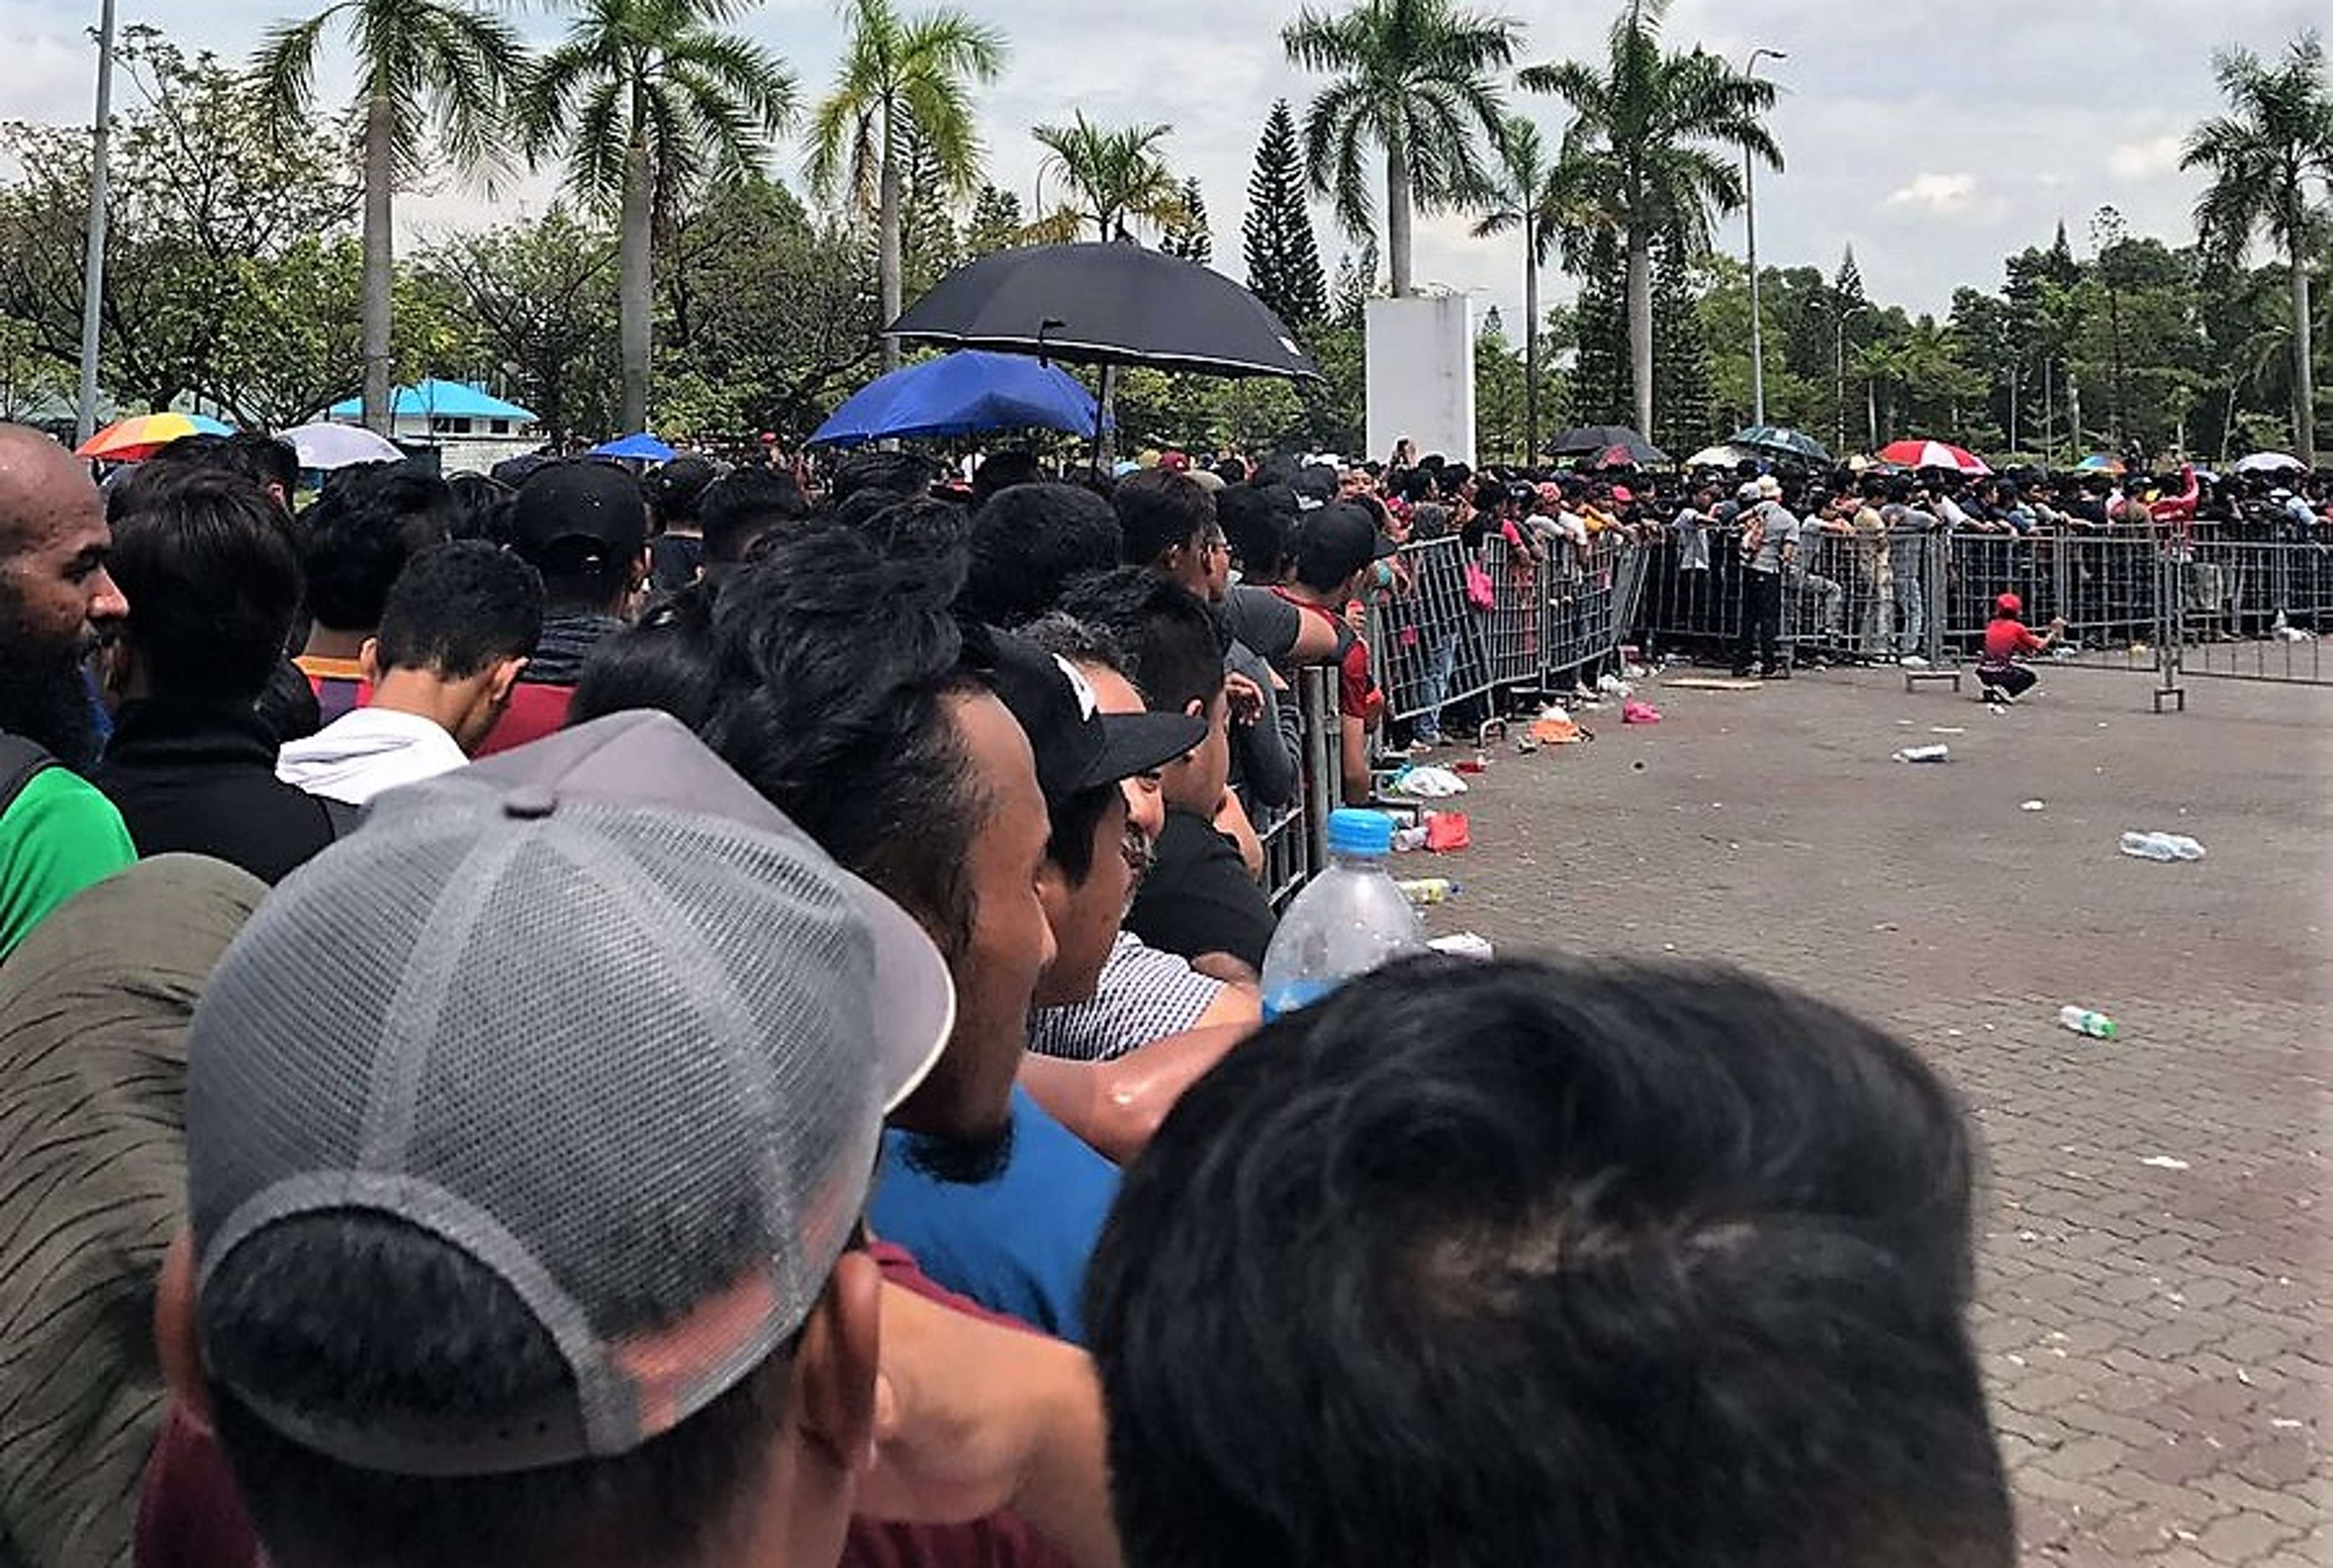 Fans queueing up at Shah Alam for tickets 28082017